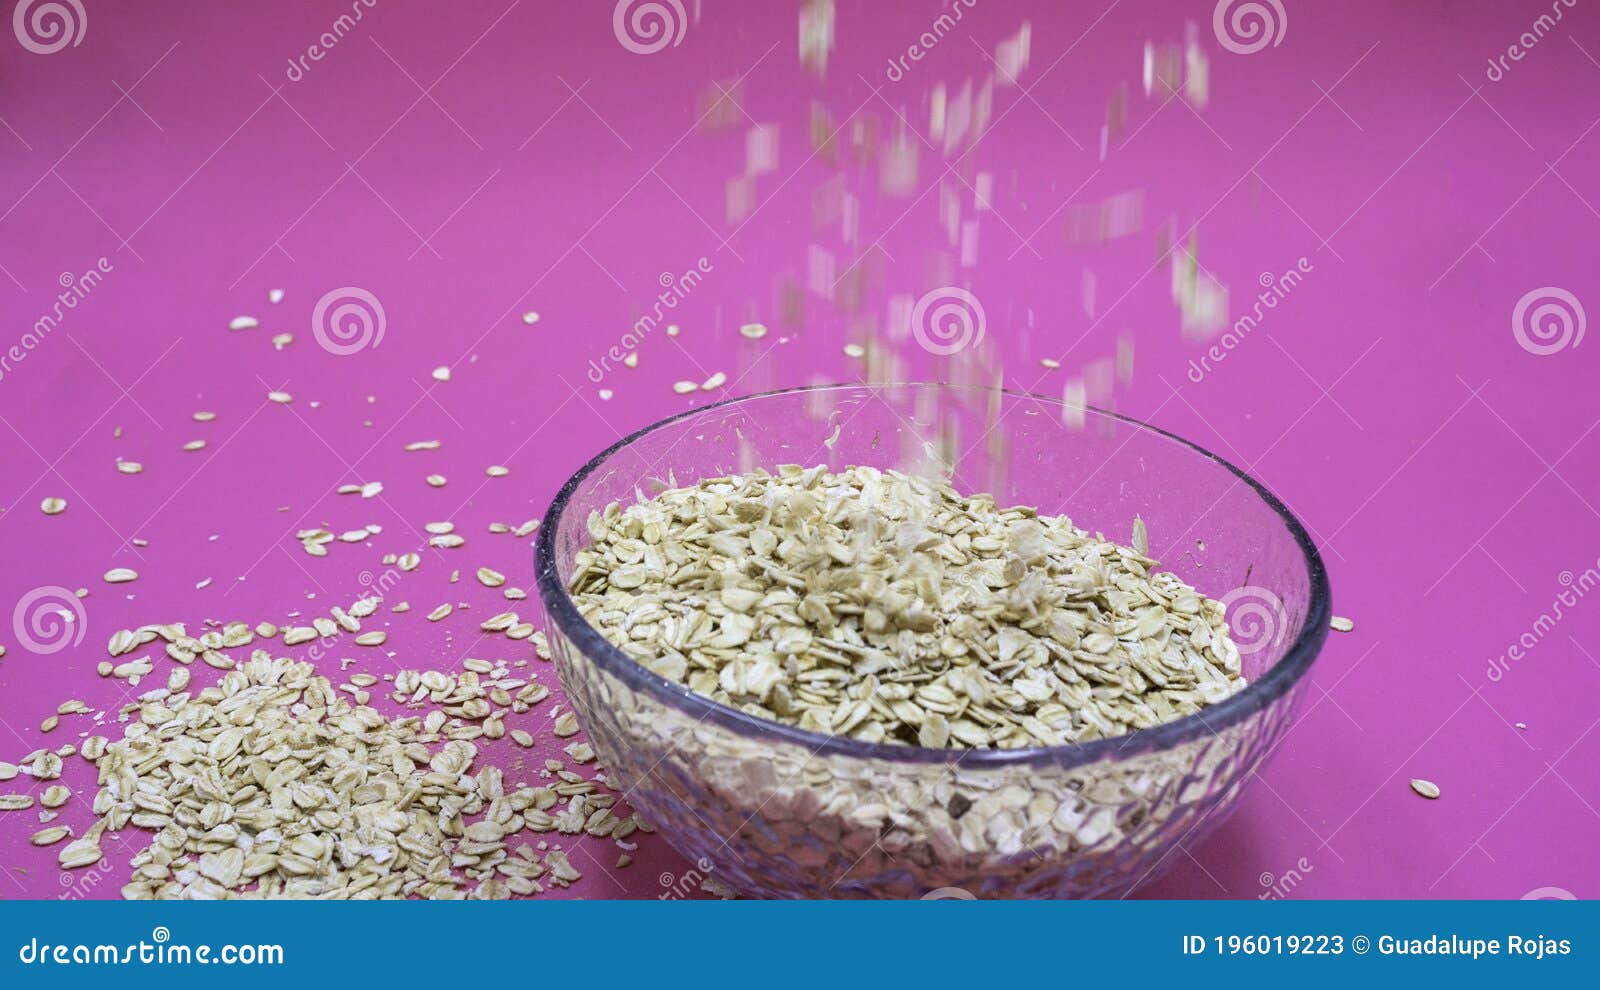 oats that in a transparent plate and oats that fall to the plate on a lilac background